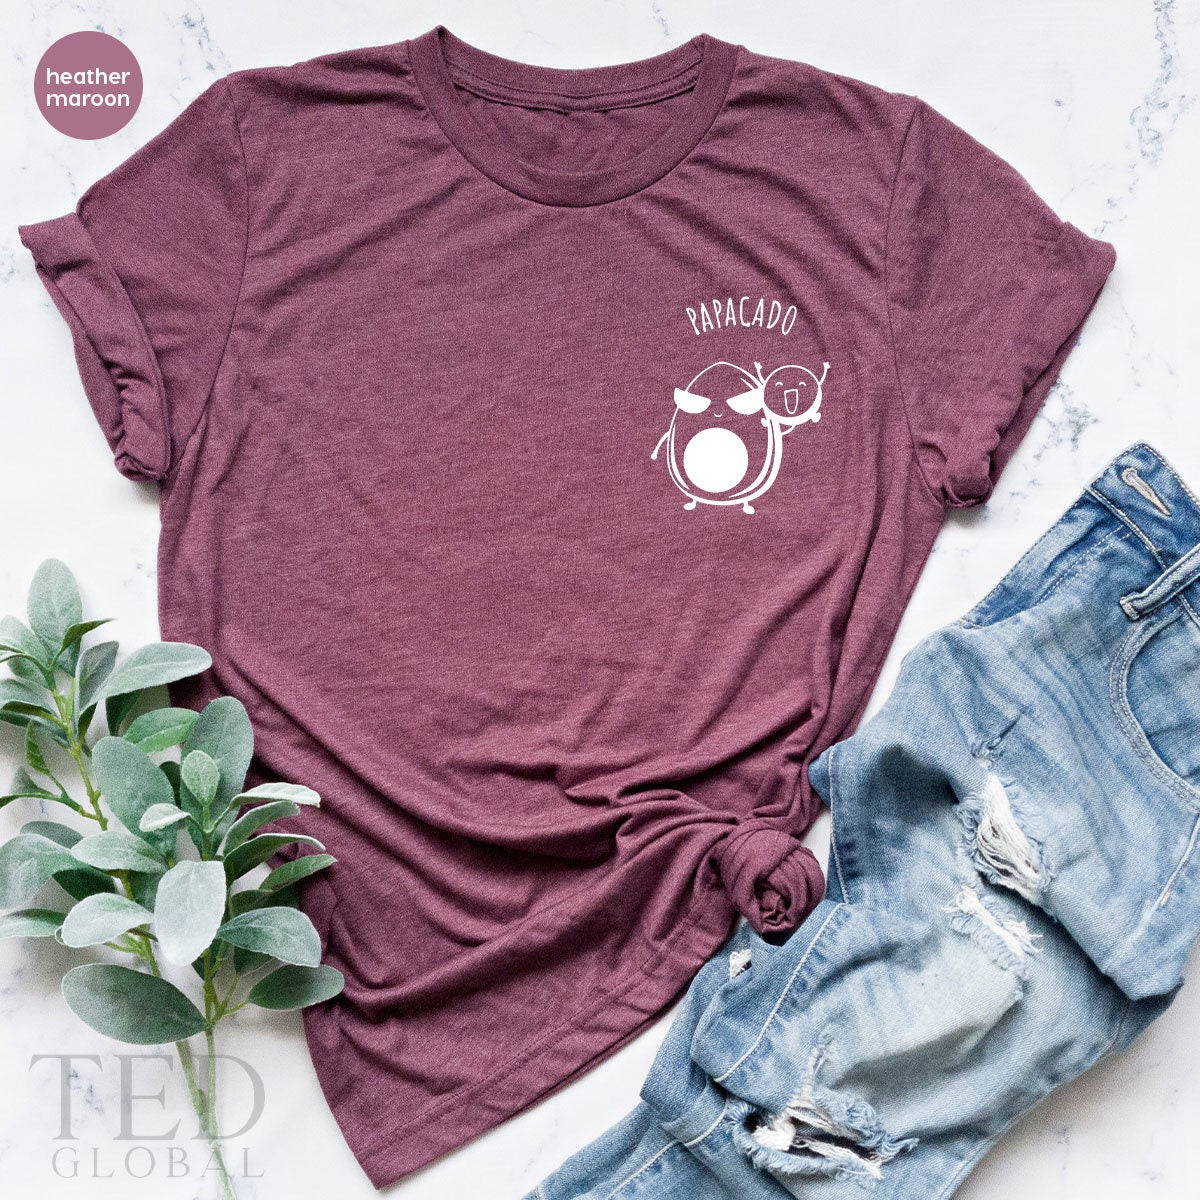 Funny Papacado Shirt, New Dad T Shirt, Pregnancy Announcement To Husband Shirt, Dad To Be Shirt, Fathers Day Gift, Daddy Gift, Avocado Tee - Fastdeliverytees.com